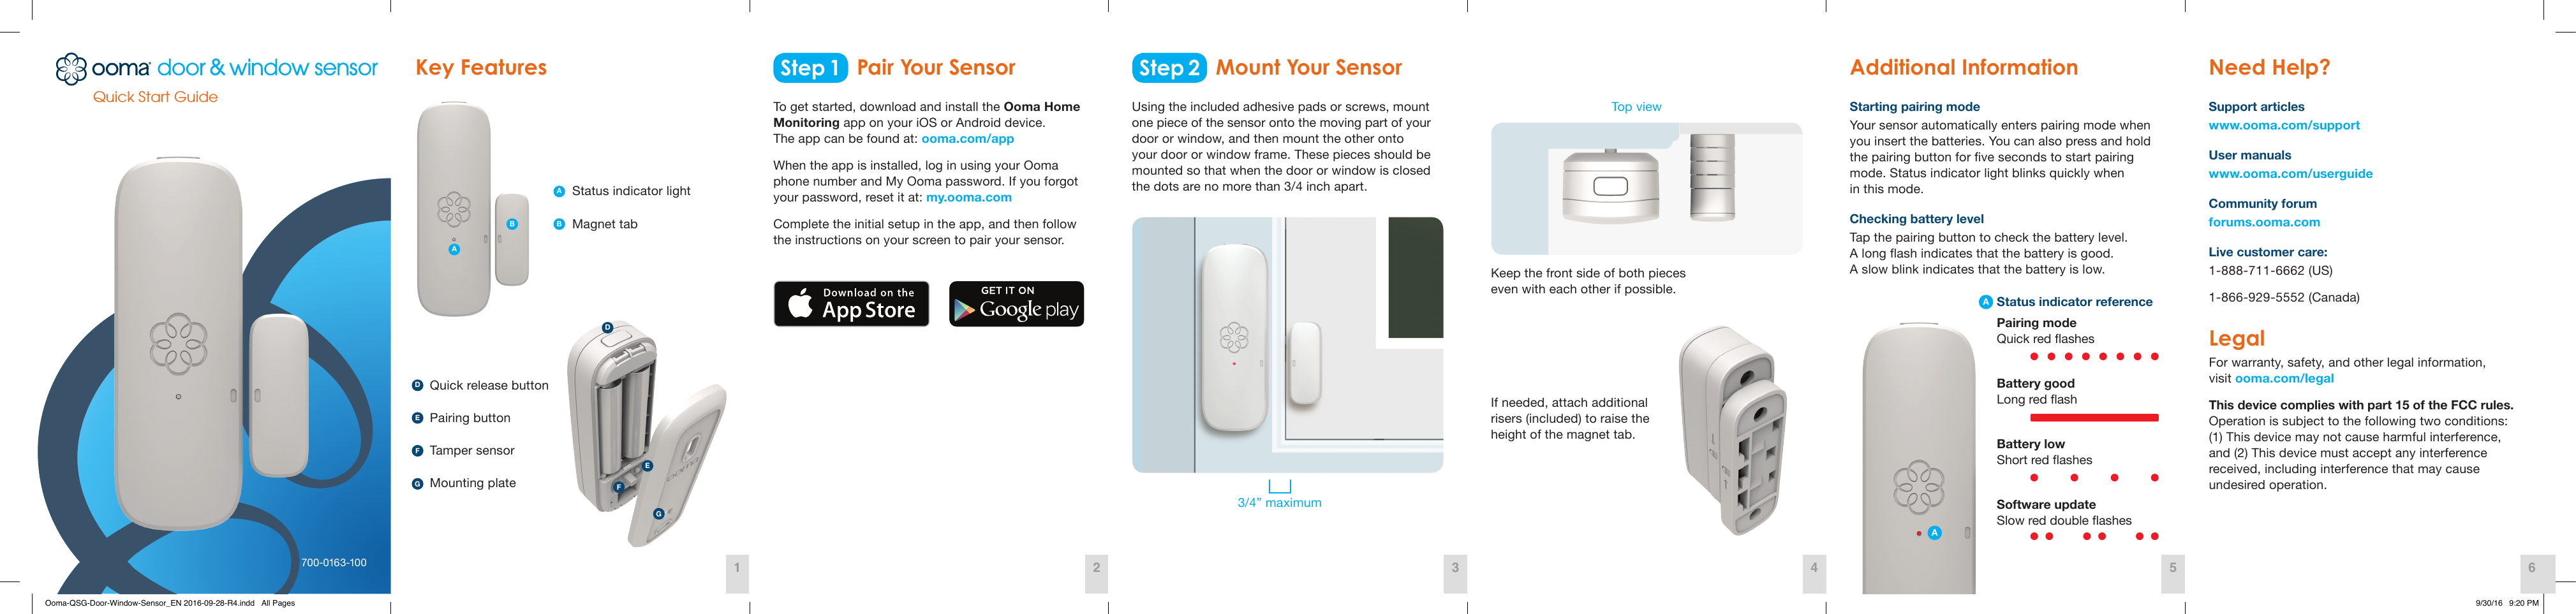 Quick Start Guide700-0163-100Step 1 Step 2Key Features  Additional Information  Need Help? Pair Your Sensor Mount Your SensorTo get started, download and install the Ooma Home Monitoring app on your iOS or Android device.  The app can be found at: ooma.com/app When the app is installed, log in using your Ooma  phone number and My Ooma password. If you forgot  your password, reset it at: my.ooma.com Complete the initial setup in the app, and then follow  the instructions on your screen to pair your sensor. Status indicator lightPairing buttonMagnet tabTamper sensorMounting plateQuick release buttonStarting pairing modeYour sensor automatically enters pairing mode when you insert the batteries. You can also press and hold the pairing button for ve seconds to start pairing mode. Status indicator light blinks quickly when  in this mode. Checking battery levelTap the pairing button to check the battery level.  A long ash indicates that the battery is good.  A slow blink indicates that the battery is low.Using the included adhesive pads or screws, mount  one piece of the sensor onto the moving part of your door or window, and then mount the other onto your door or window frame. These pieces should be mounted so that when the door or window is closed  the dots are no more than 3/4 inch apart.Keep the front side of both pieces even with each other if possible.If needed, attach additional risers (included) to raise the height of the magnet tab. 3/4” maximumTop view Support articles www.ooma.com/support User manualswww.ooma.com/userguide Community forum forums.ooma.com Live customer care: 1-888-711-6662 (US) 1-866-929-5552 (Canada) Legal For warranty, safety, and other legal information,  visit ooma.com/legal This device complies with part 15 of the FCC rules. Operation is subject to the following two conditions:  (1) This device may not cause harmful interference,  and (2) This device must accept any interference  received, including interference that may cause  undesired operation. Status indicator referencePairing mode Quick red ashesBattery good Long red ashBattery low Short red ashesSoftware update Slow red double ashes1 42 53 6ADDBEEFFGGAAABFEDGOoma-QSG-Door-Window-Sensor_EN 2016-09-28-R4.indd   All Pages 9/30/16   9:20 PM